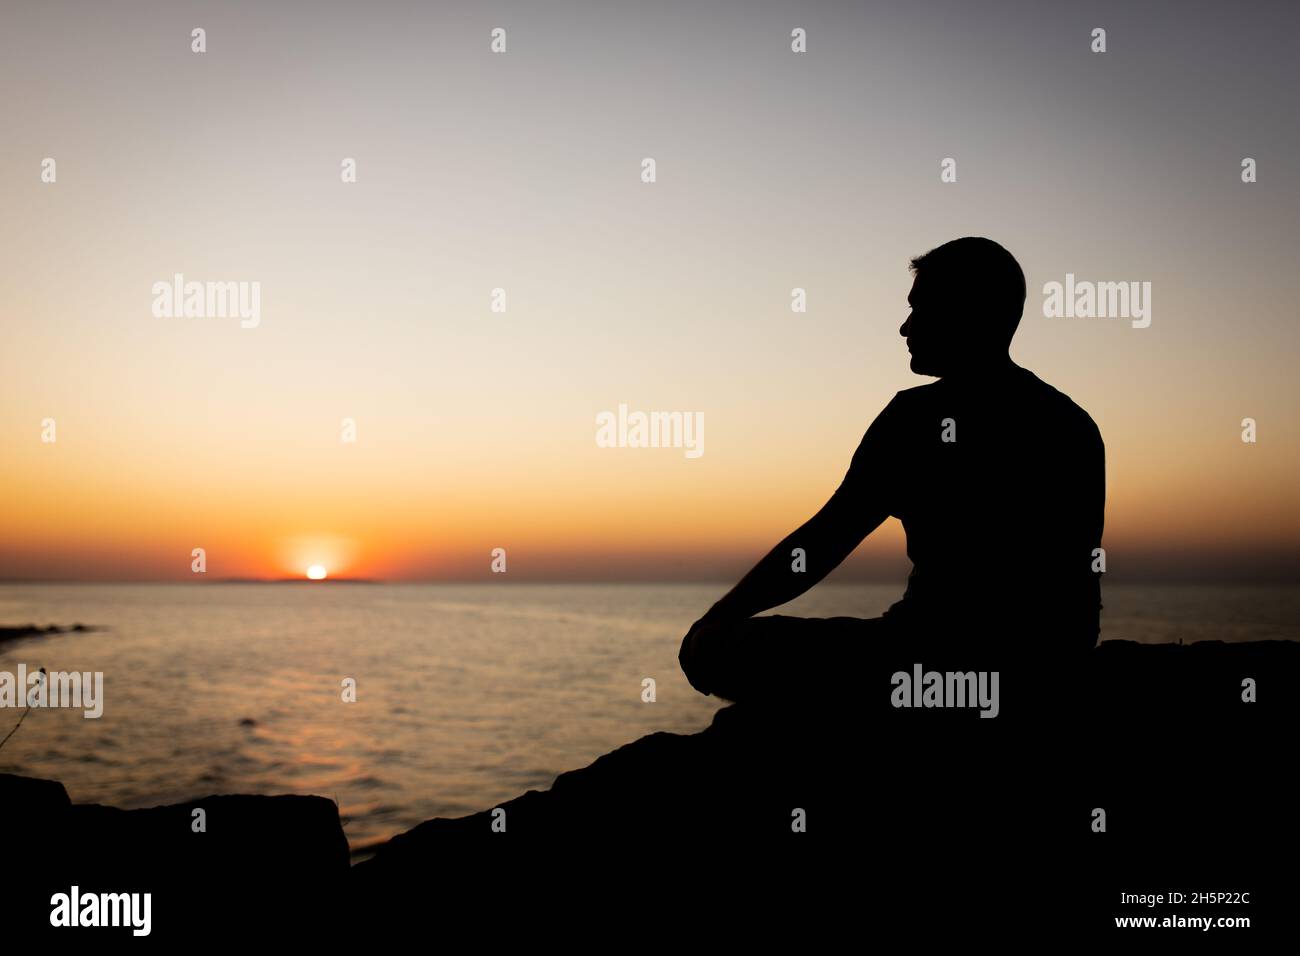 A man enjoys the view of the sunset on the sea, sitting on a rock. Side view, silhouette. Stock Photo